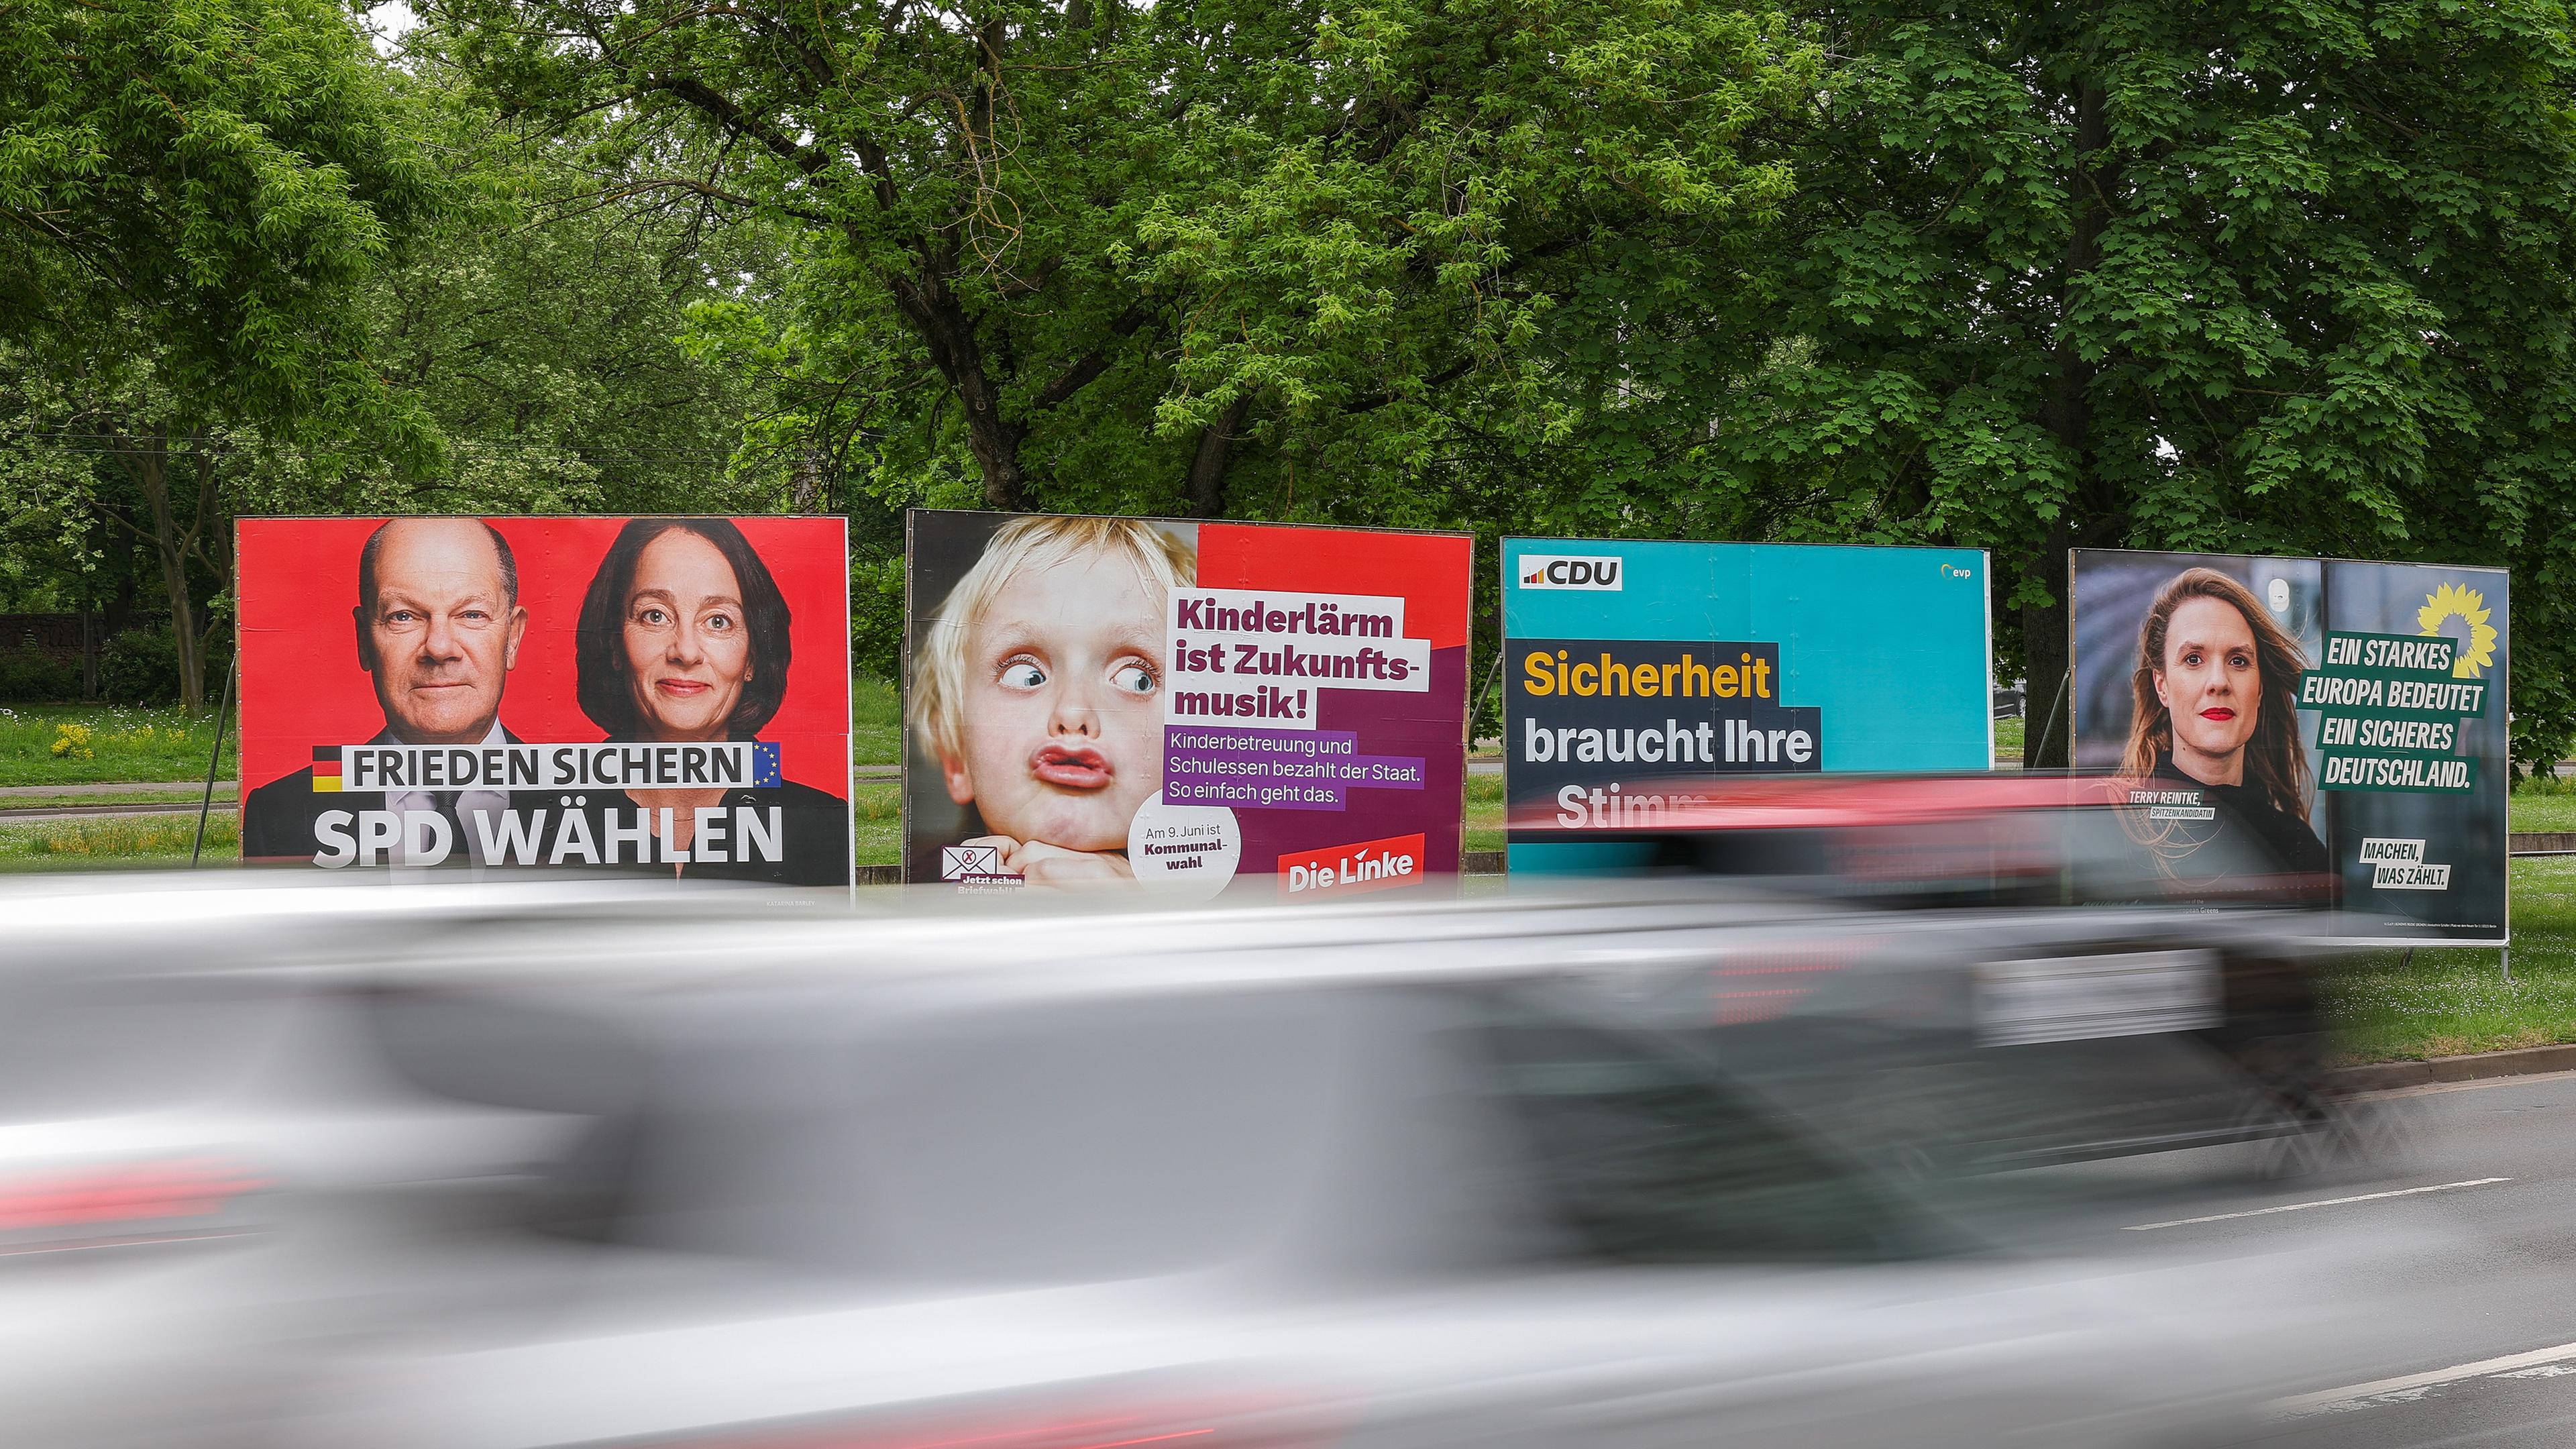 Typical: Wahlplakate Europawahl